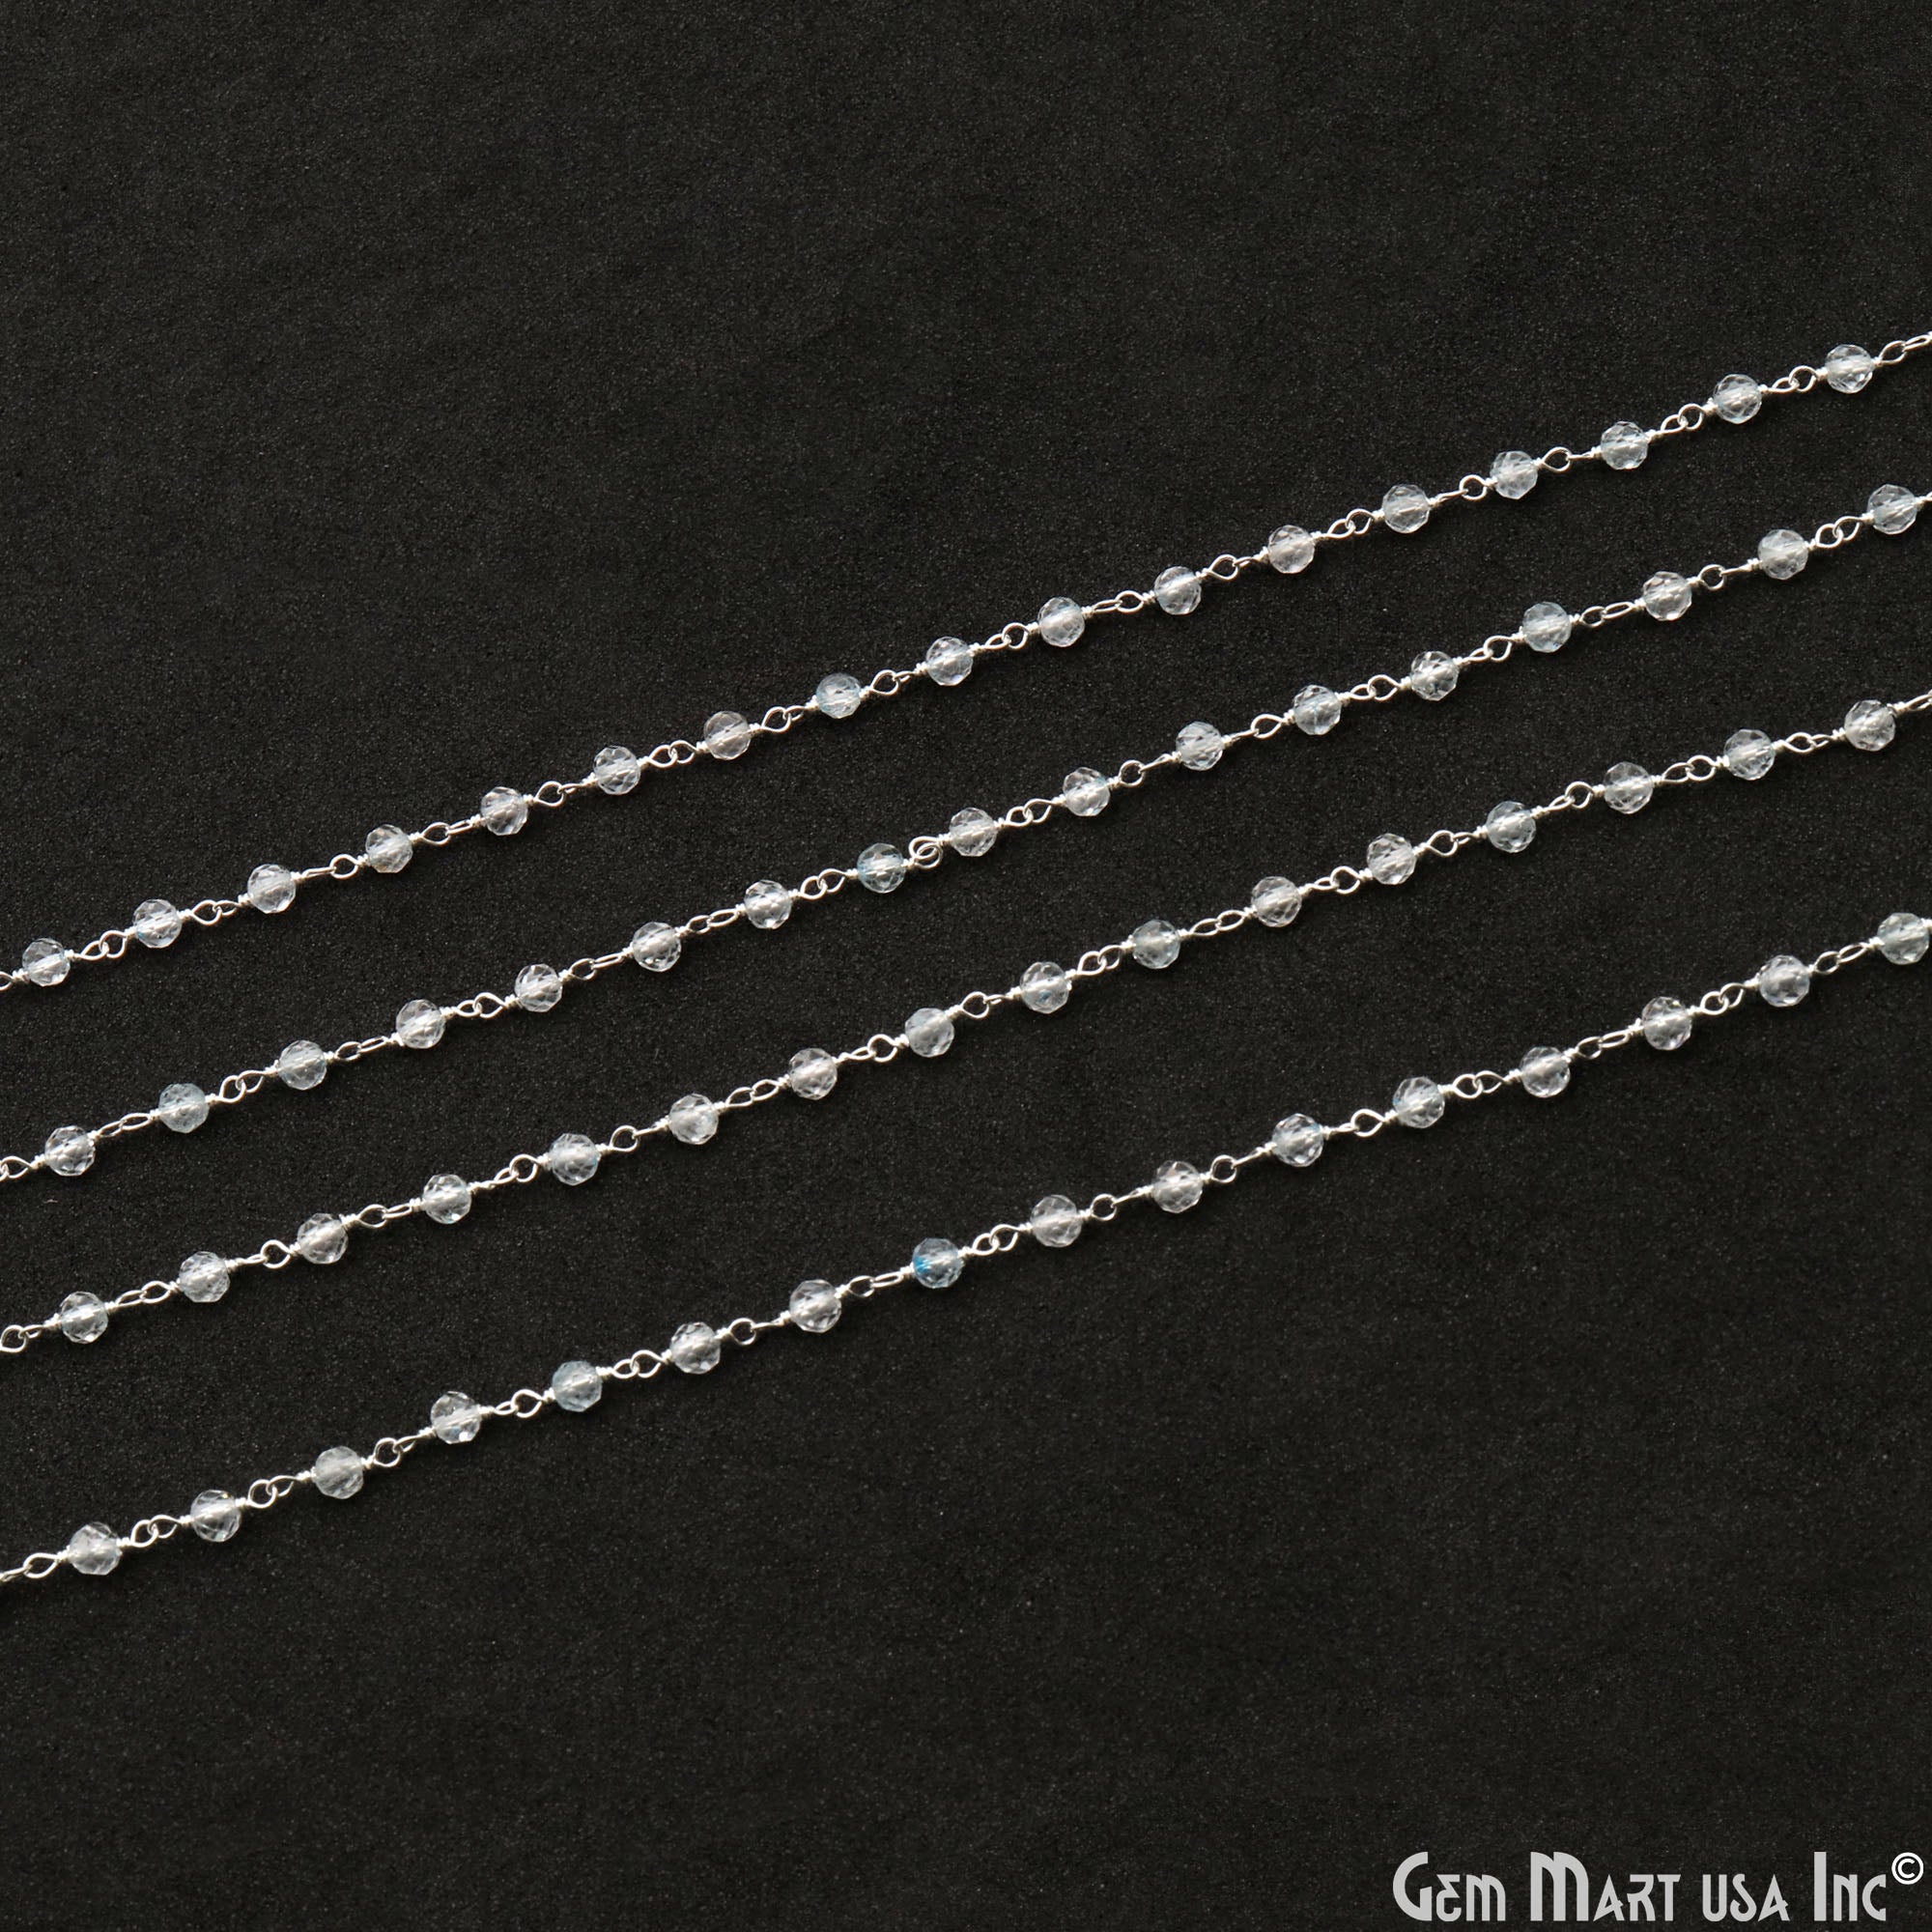 White Topaz 3-3.5mm Faceted Beads Sterling Silver Wire Wrapped Rosary